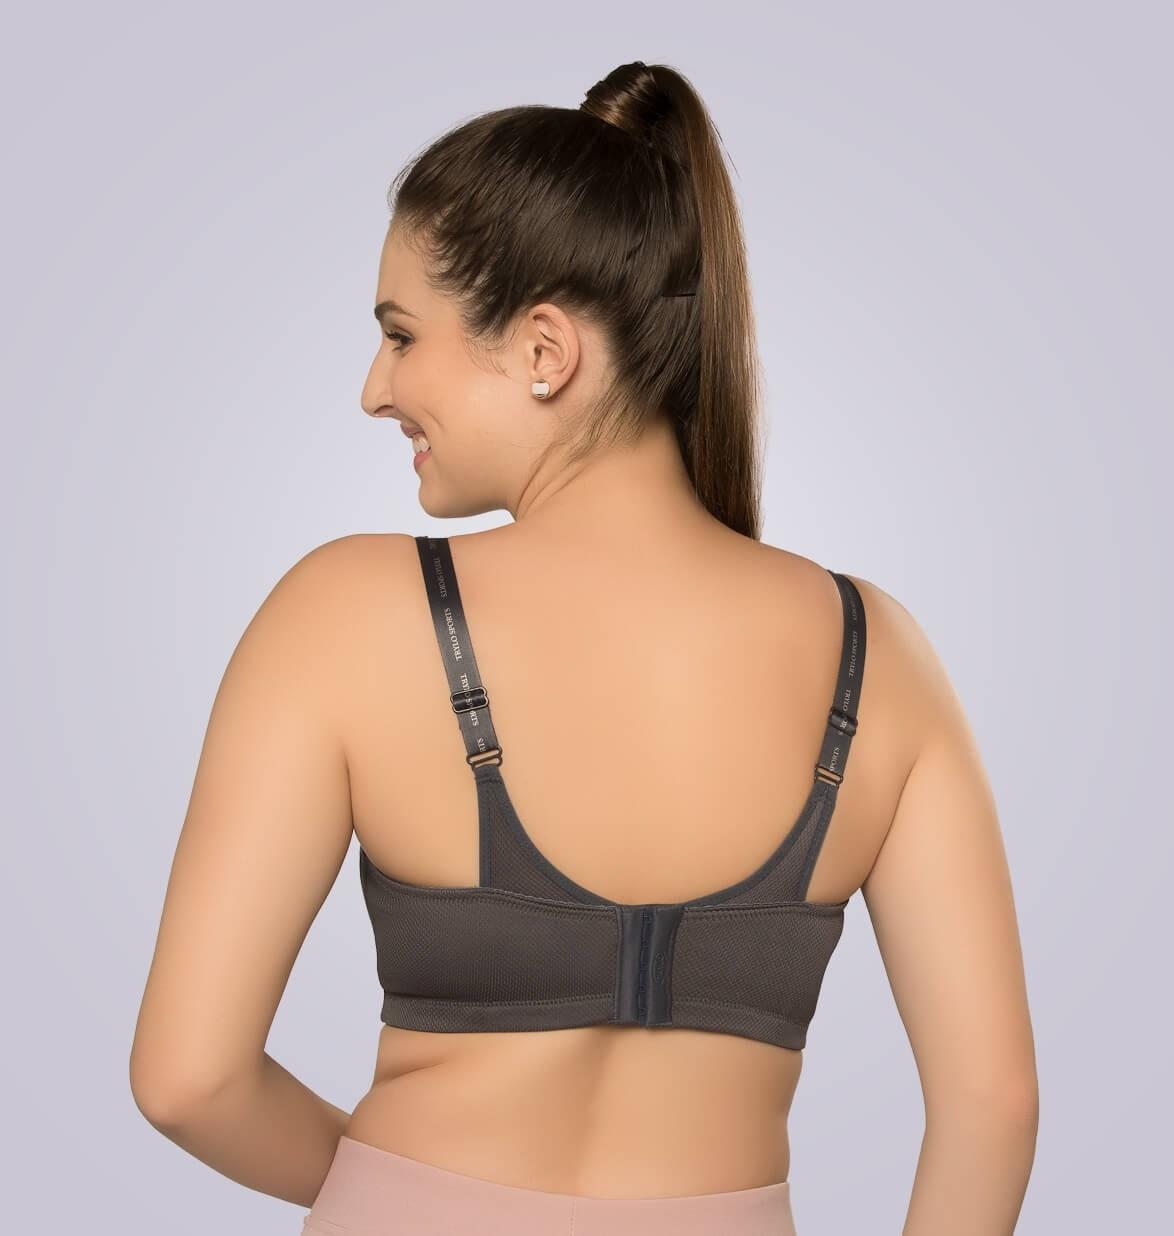 TRYLO NON PADDED NON WIRED SPORTS IMPACT ADJUSTMENT BRA SPORTS